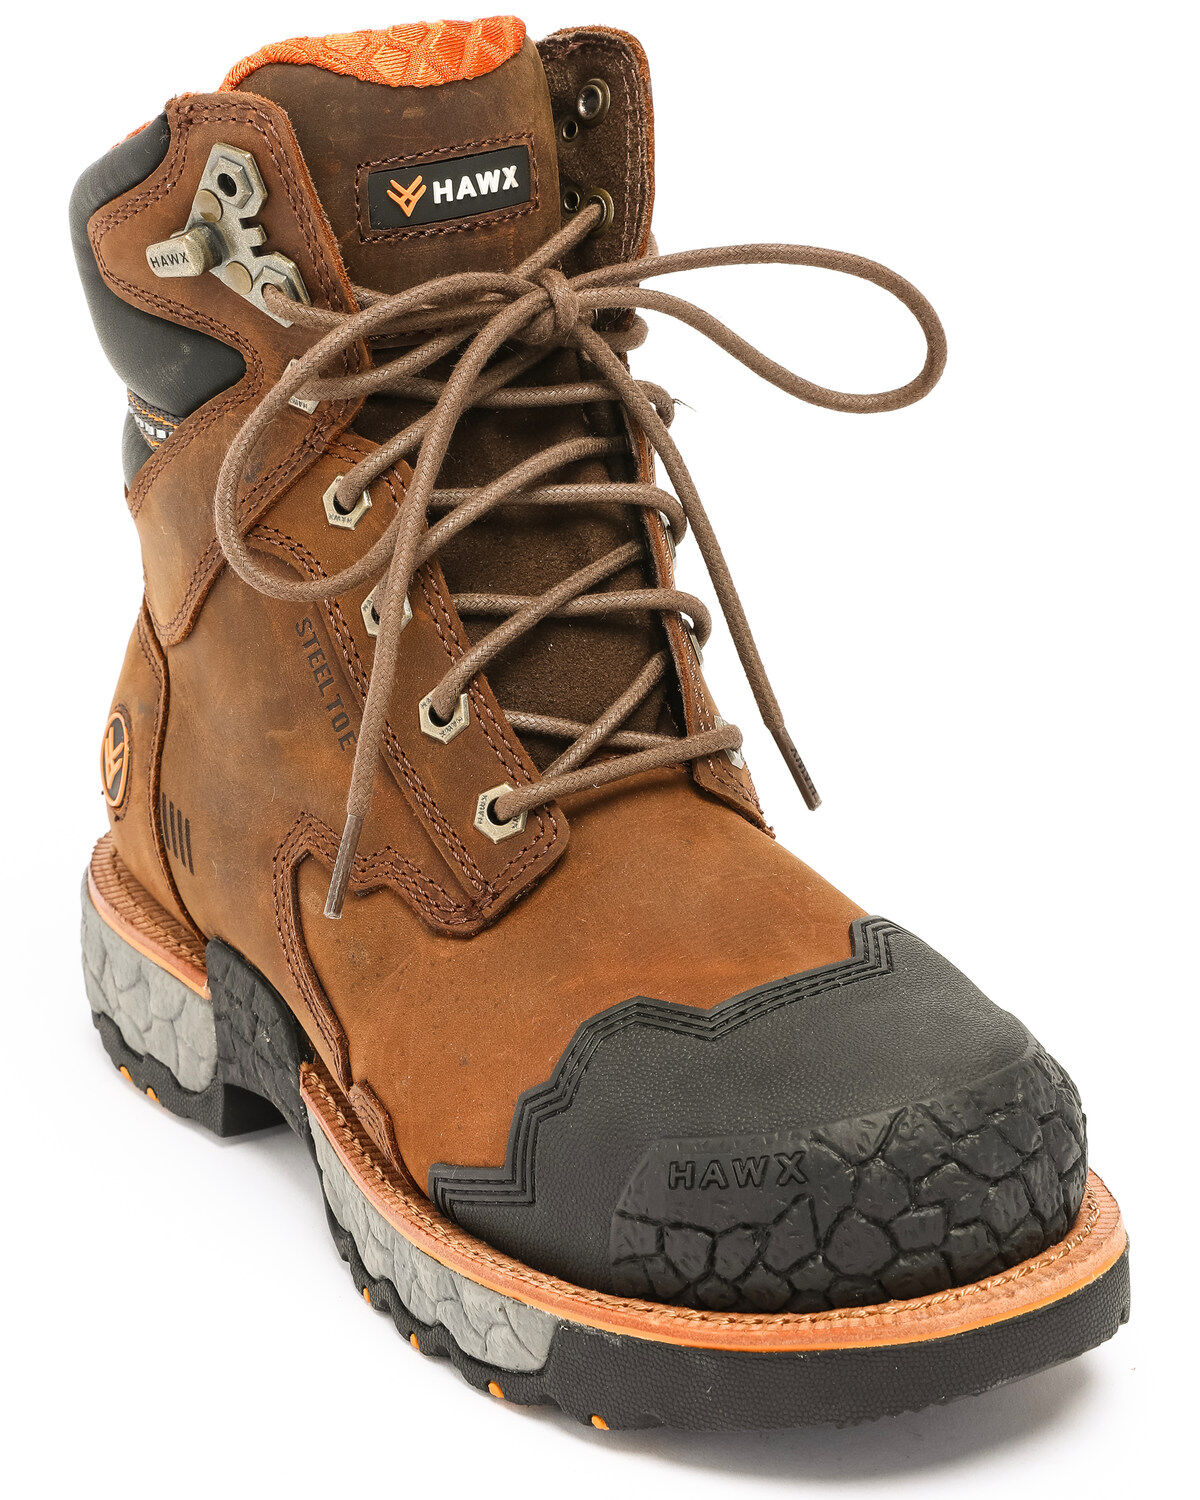 Lace-Up Work Boots - Boot Barn